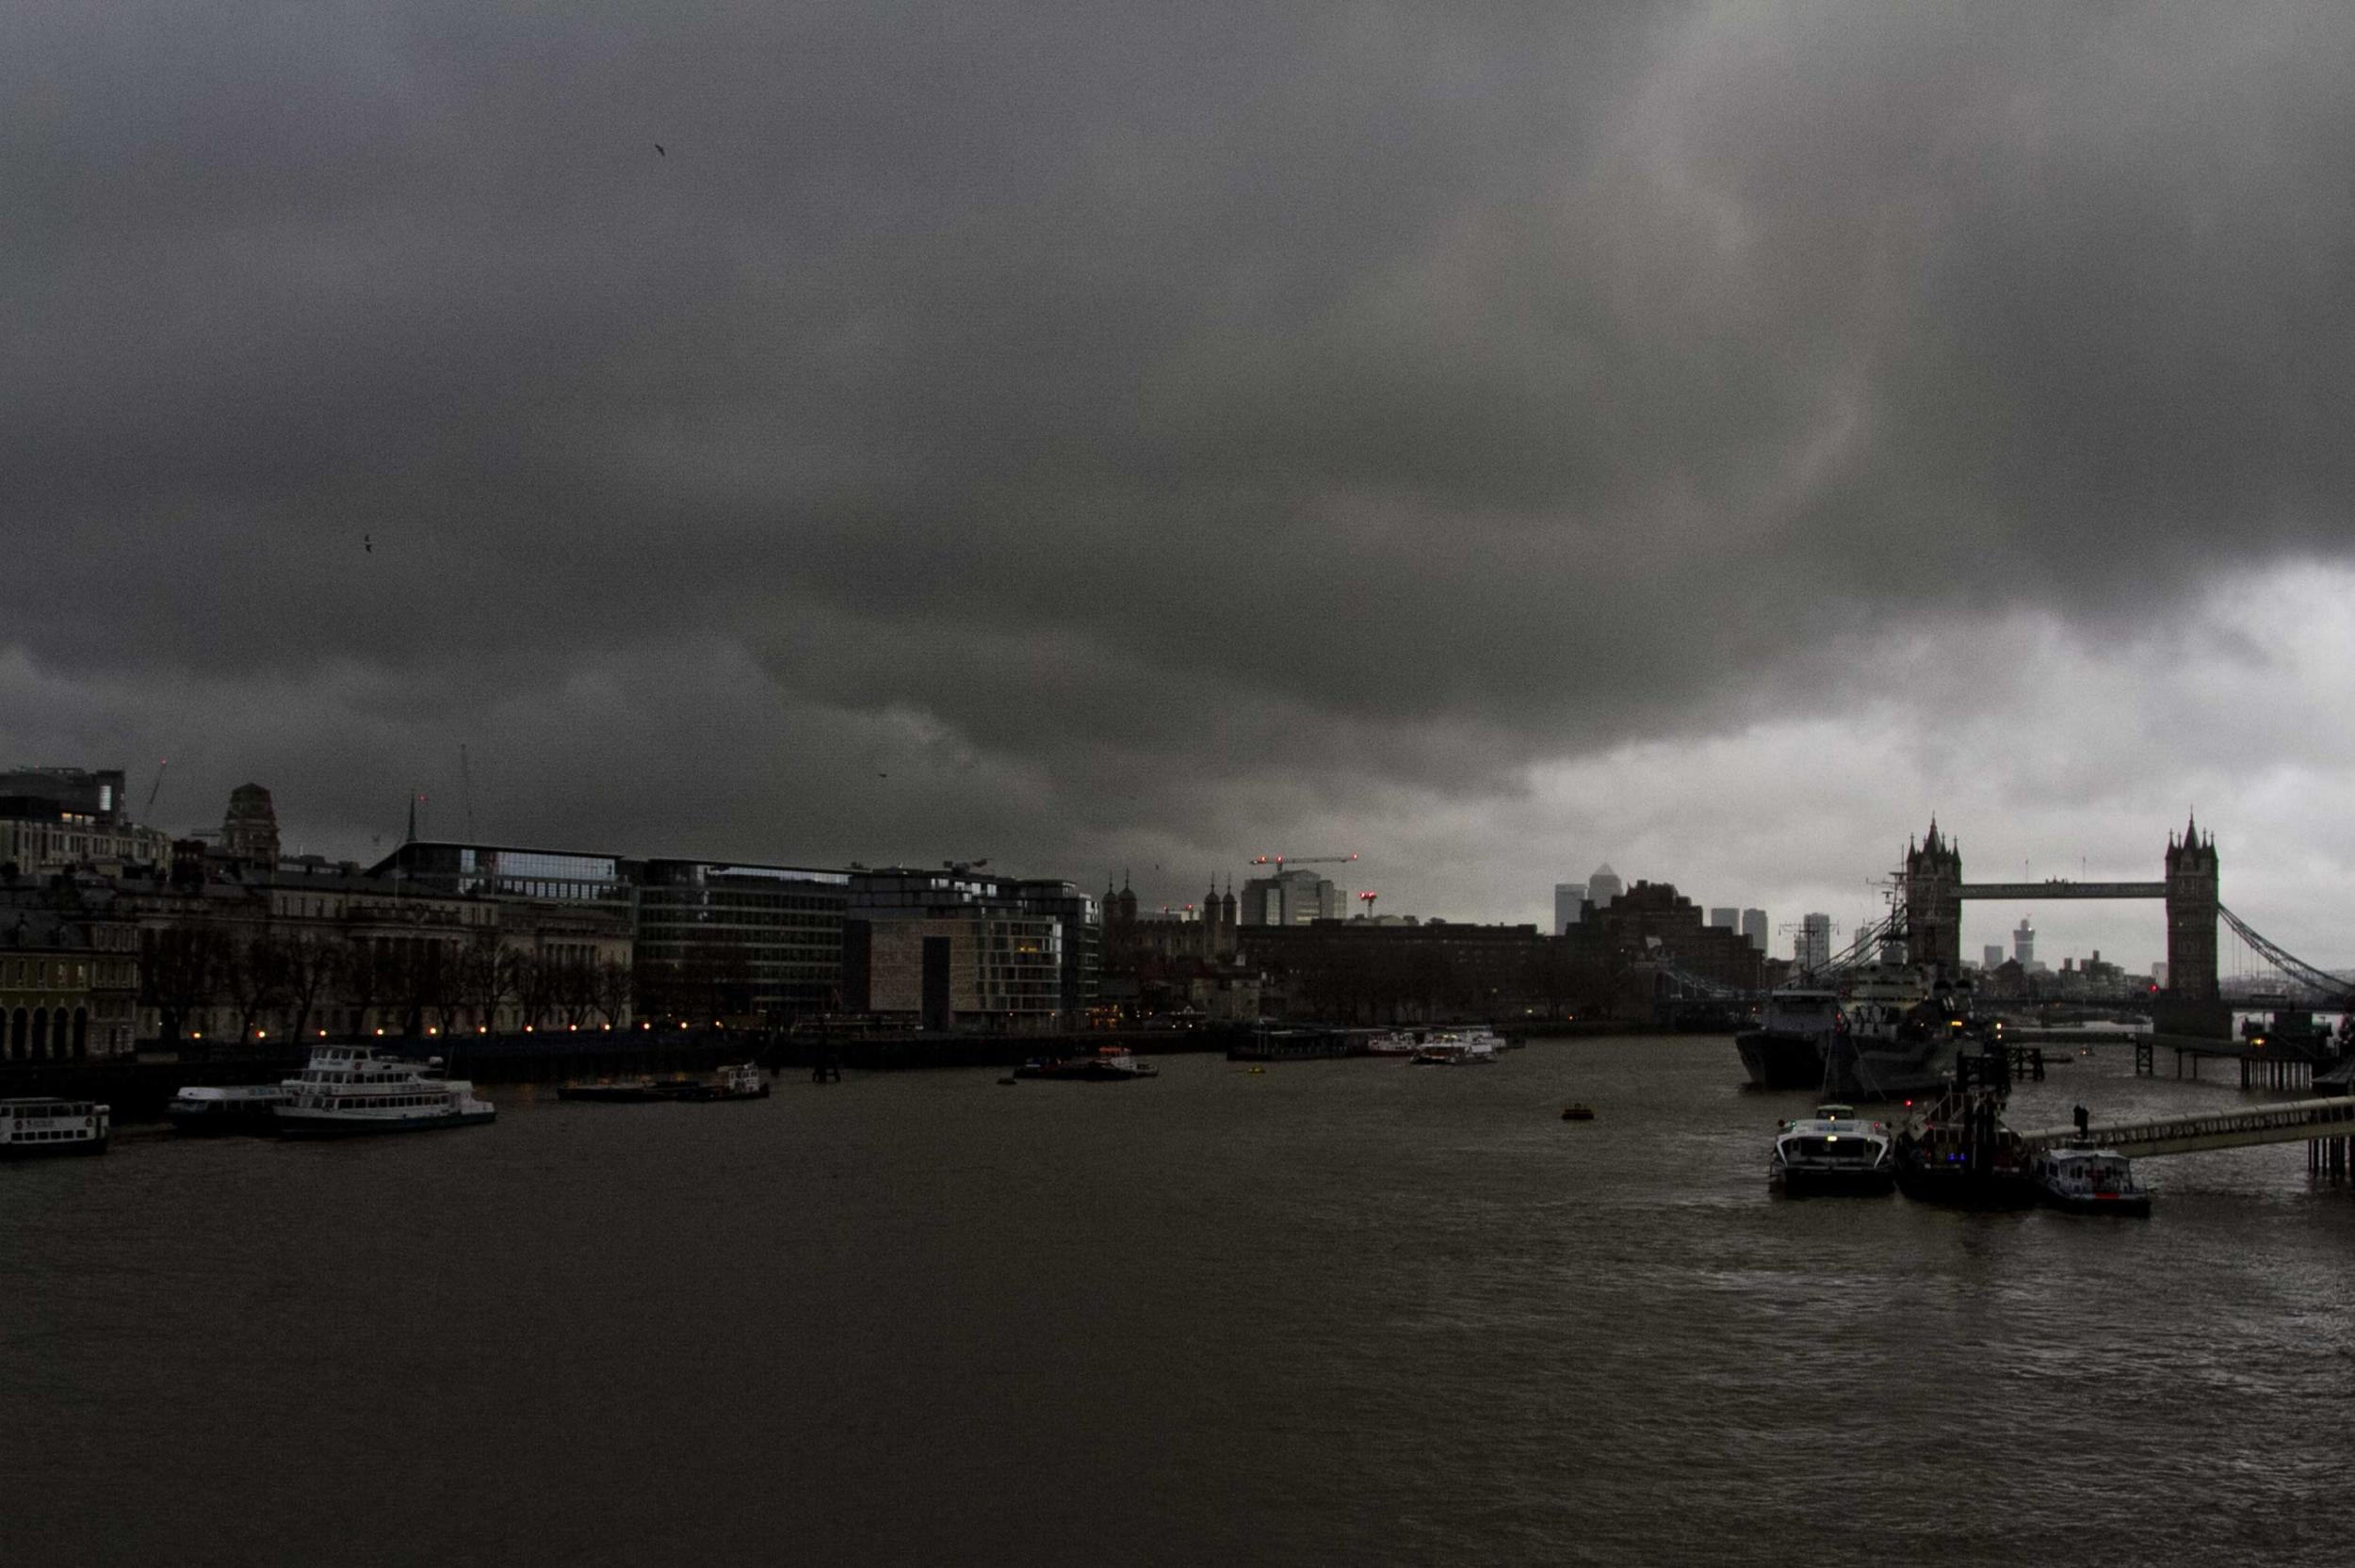 Dark clouds gather over Canary Wharf and Tower Bridge